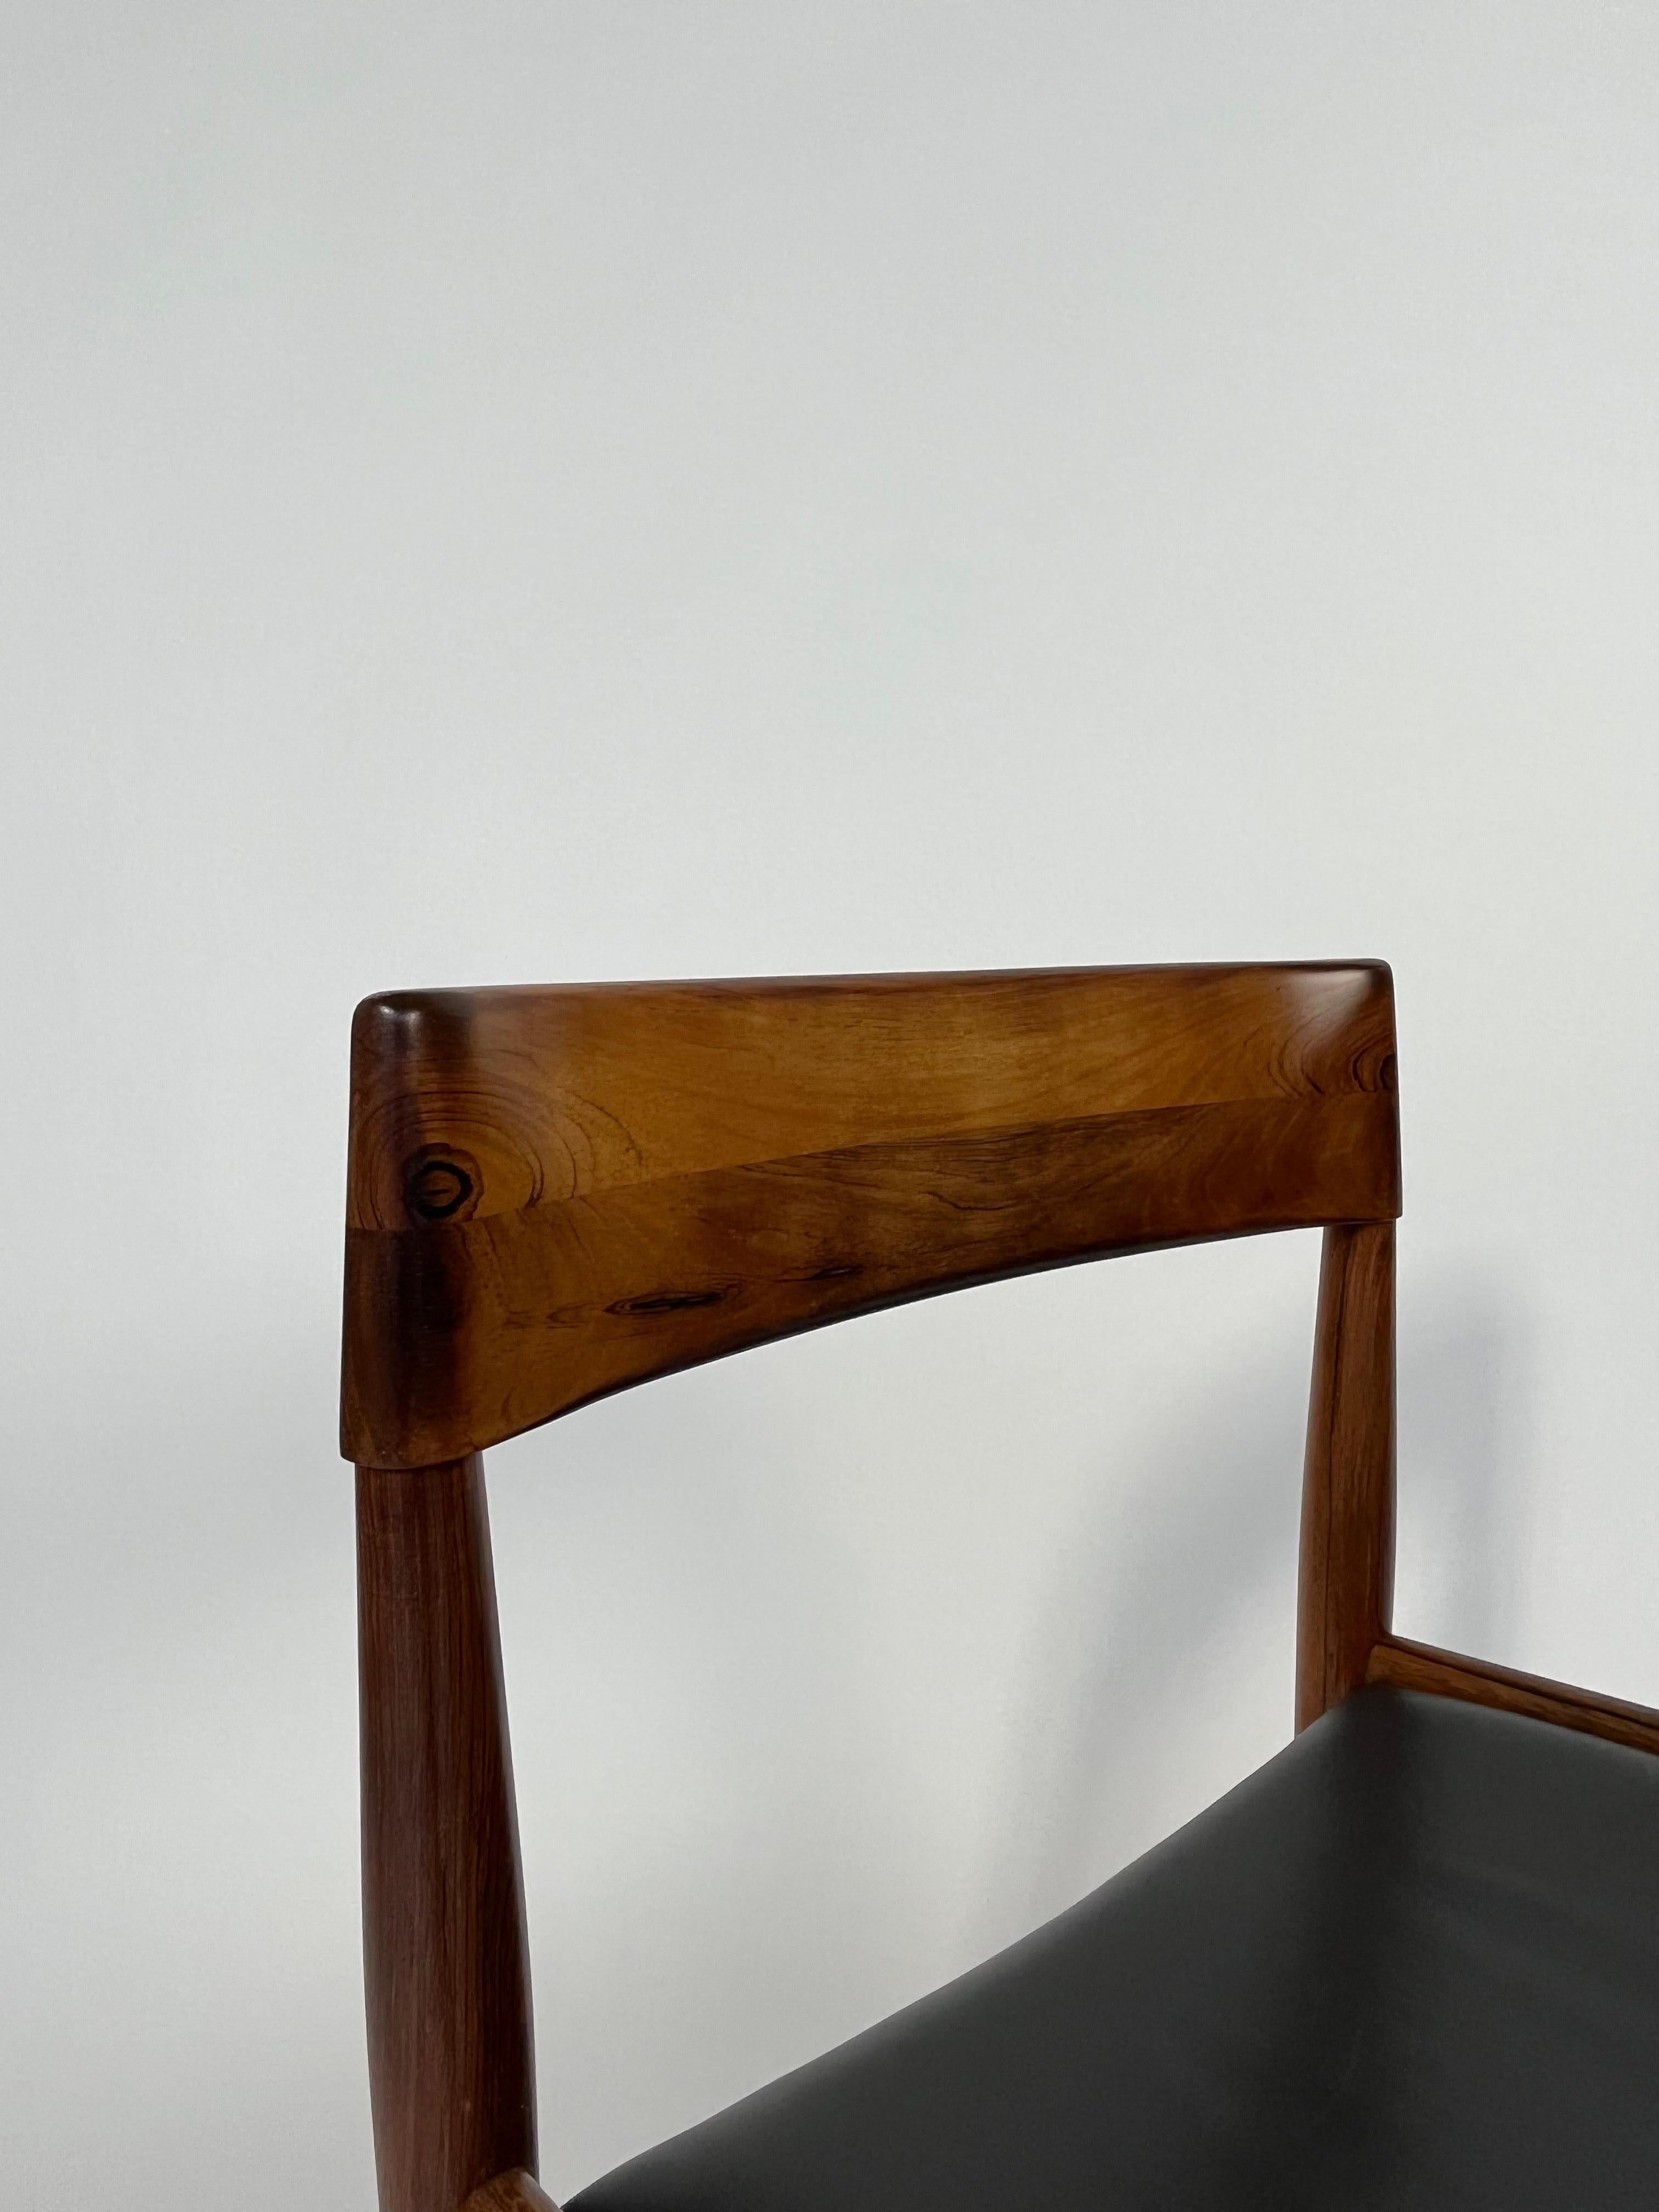 Pair of Grete Jalk Dining Chairs Rosewood P Jeppesen Denmark 1960s For Sale 6